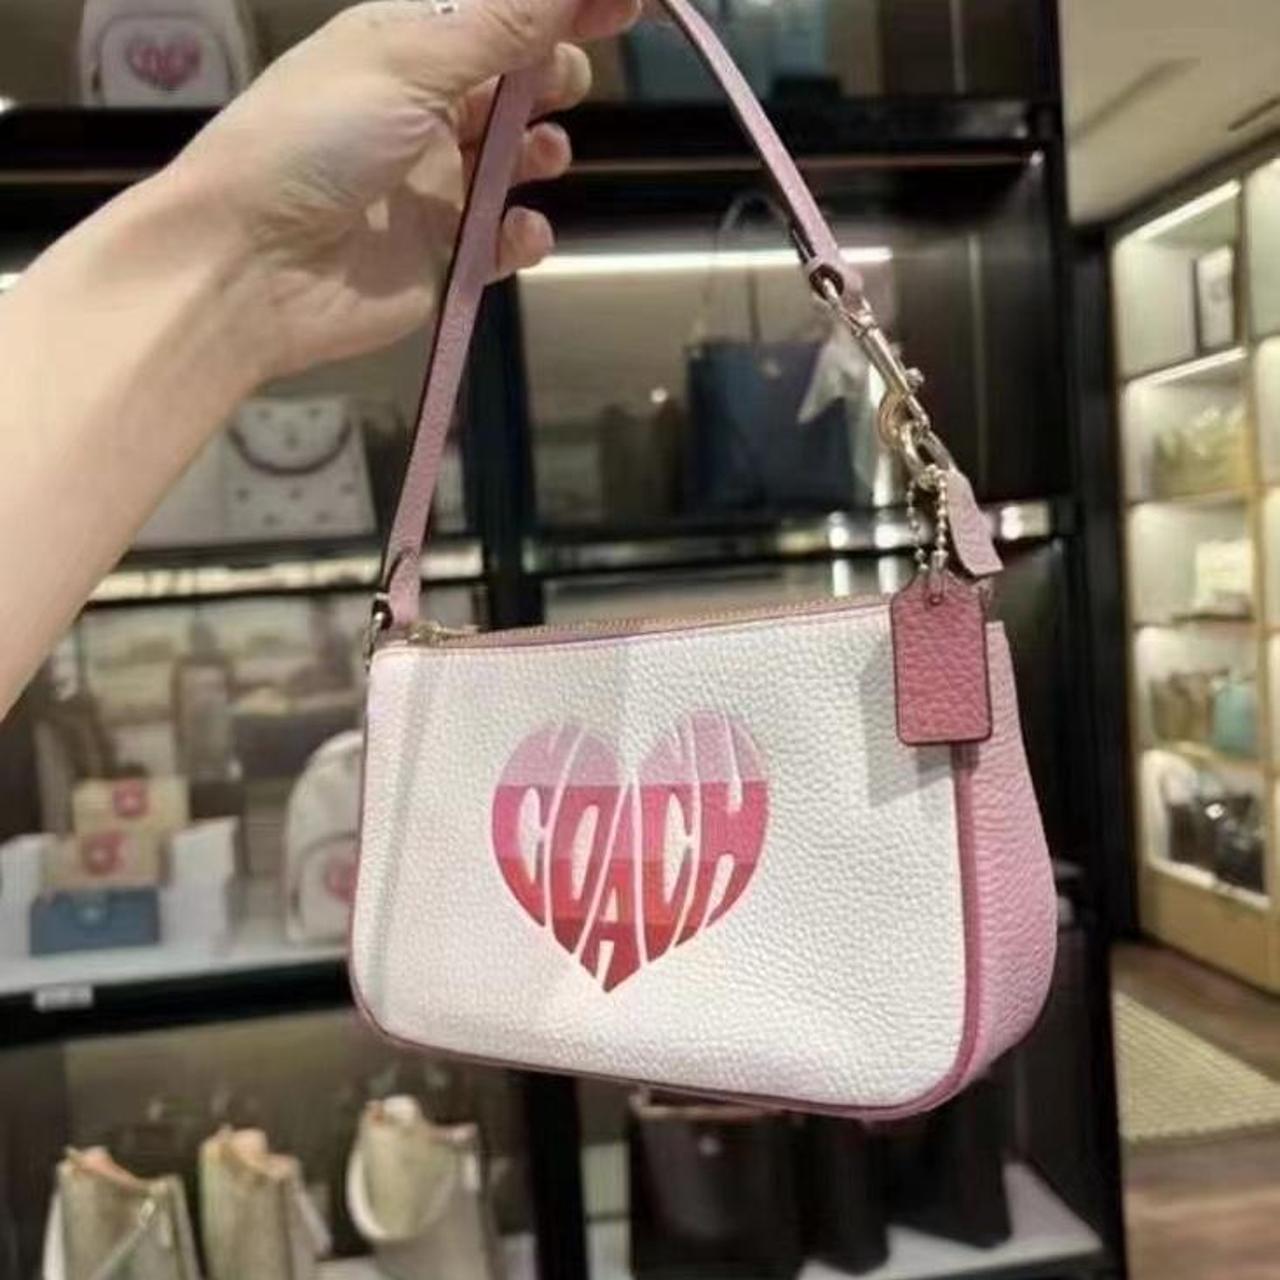 Coach Women's White and Pink Bag